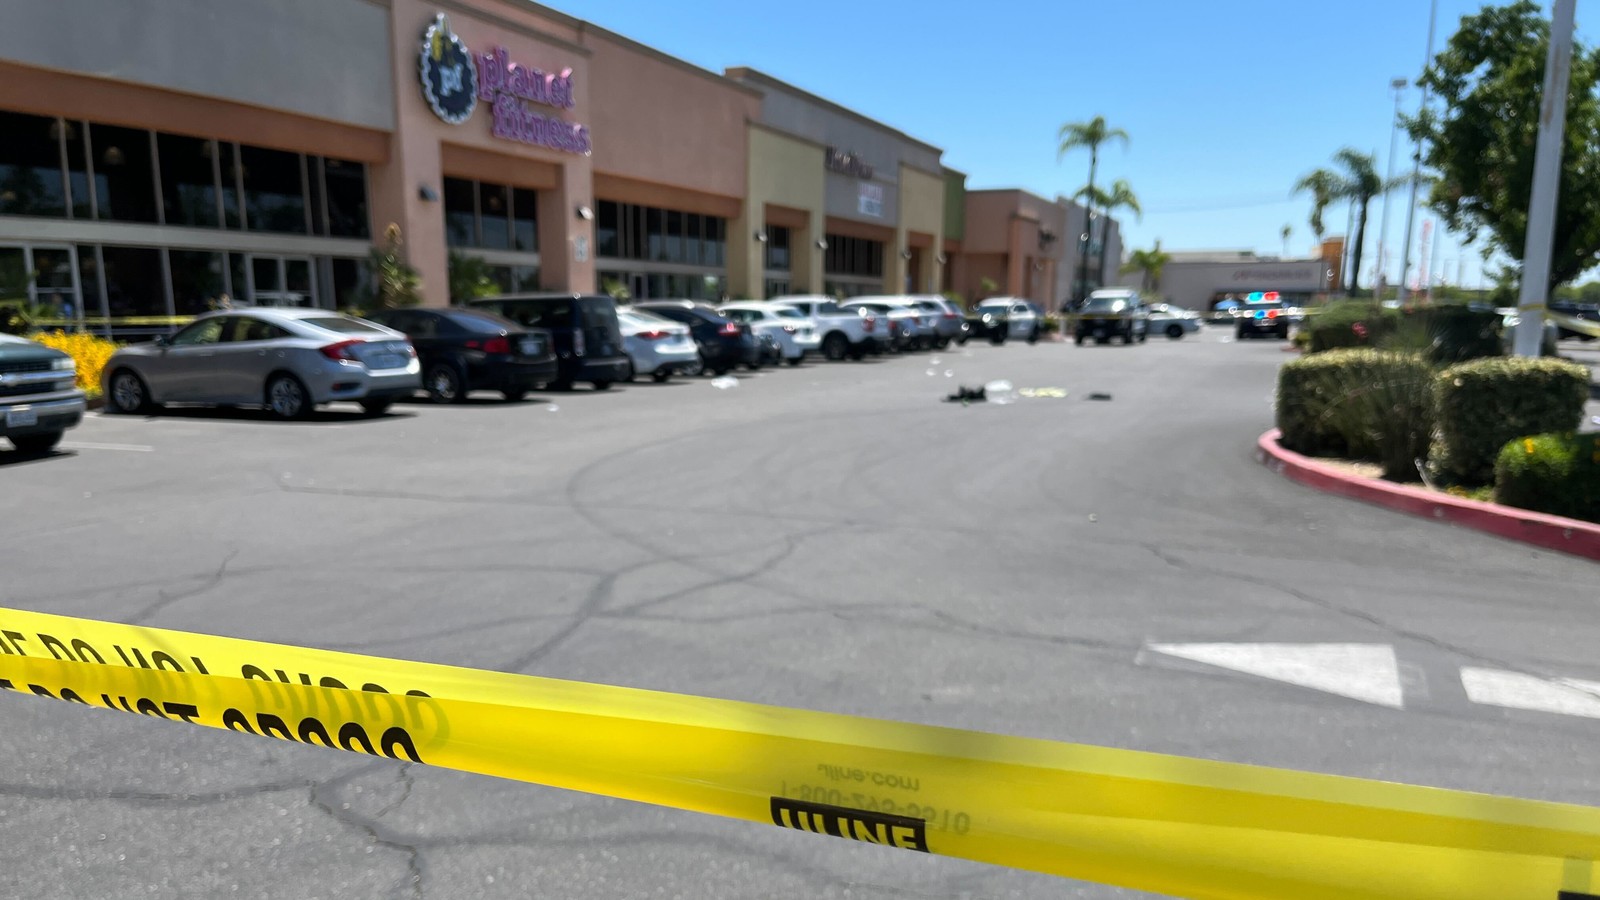 Man dies after being run over by vehicle in parking lot of Fresno shopping center: PD